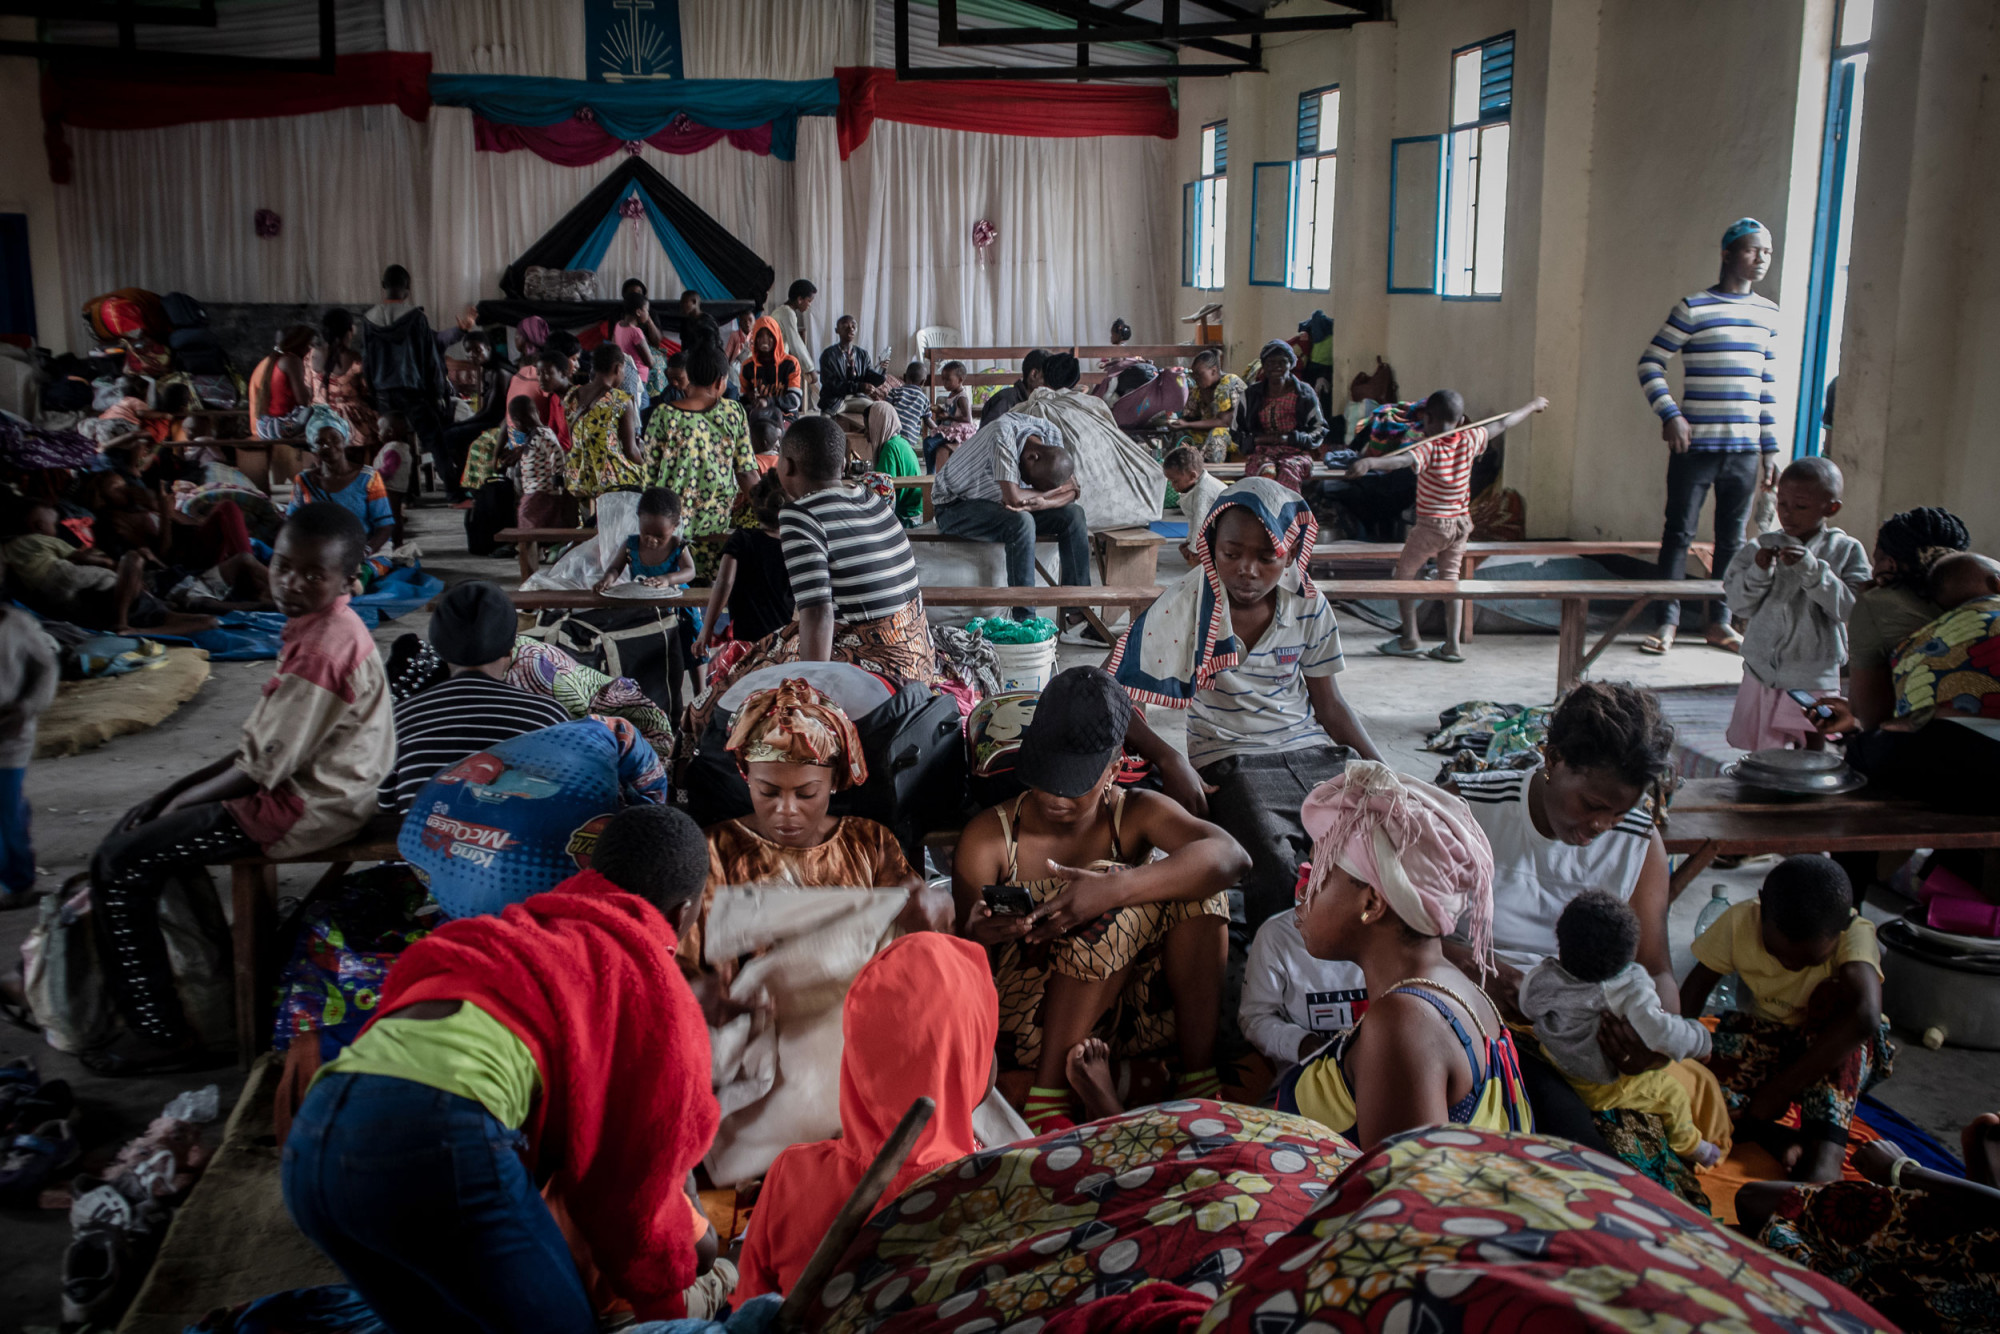 North Kivu, June 2, 2021. People seek refuge in a church in the town of Sake after the government ordered the evacuation of most of the city of Goma, leaving hundreds of thousands of people displaced and with almost no assistance. © Guerchom Ndebo for Fondation Carmignac